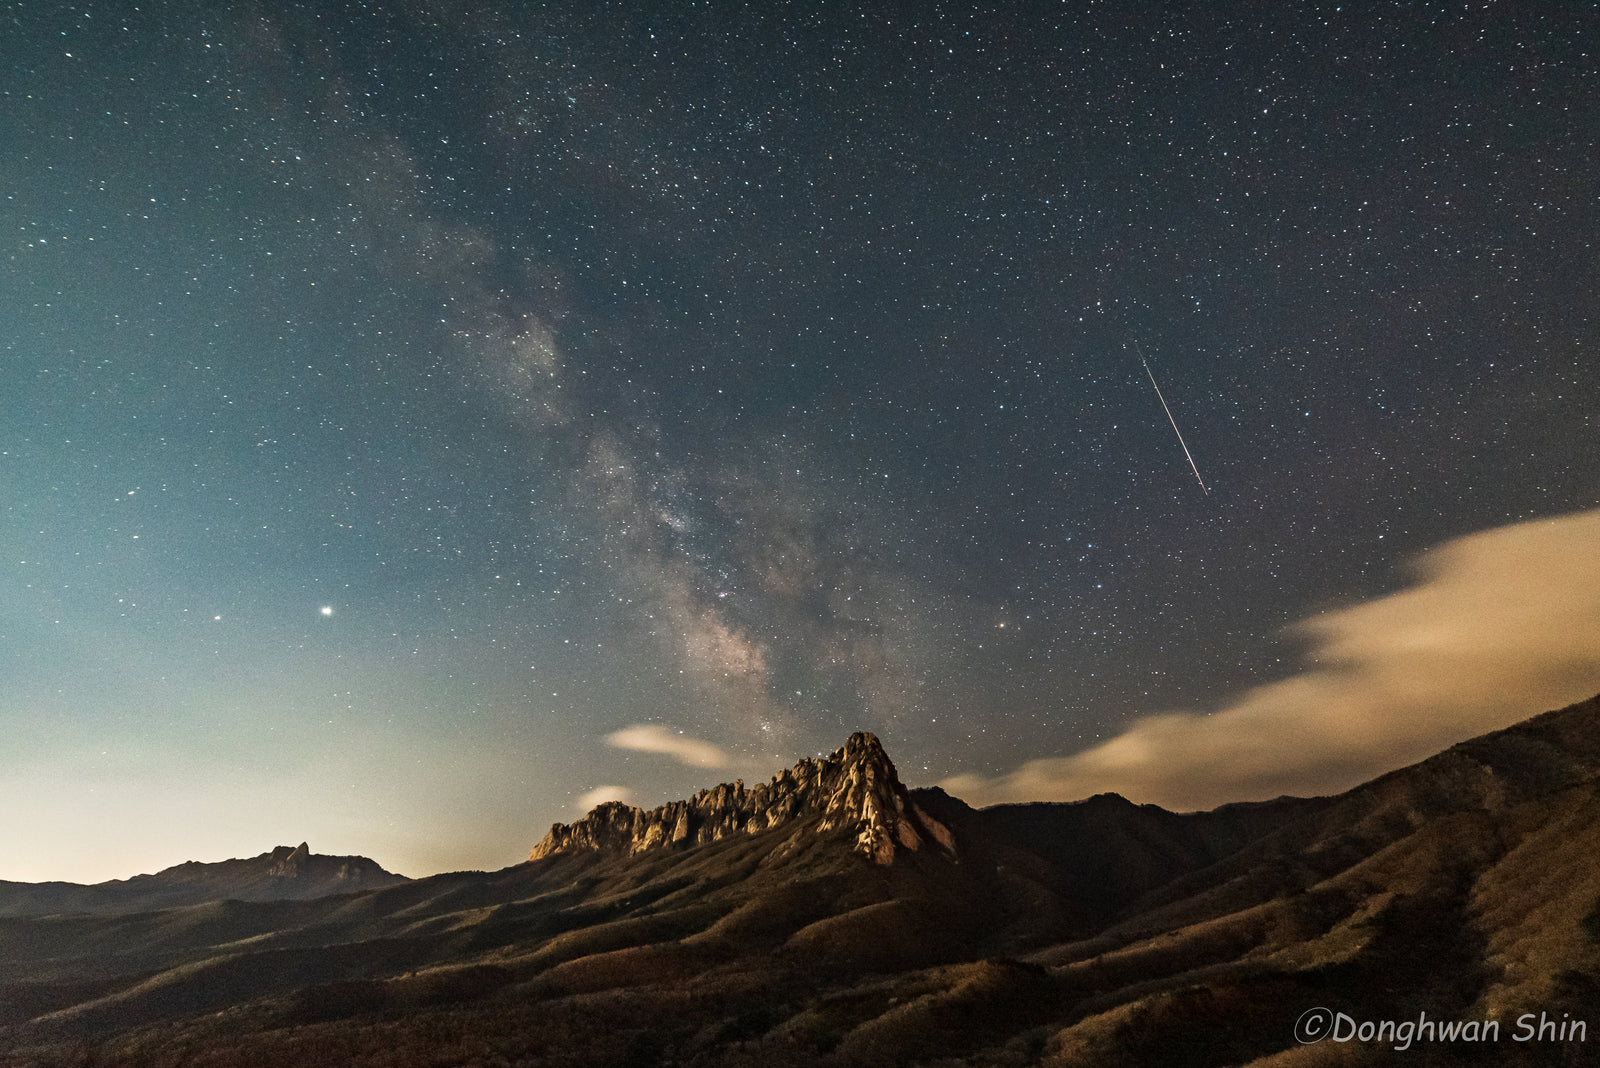 How To Pick the Right Lens for Astrophotography